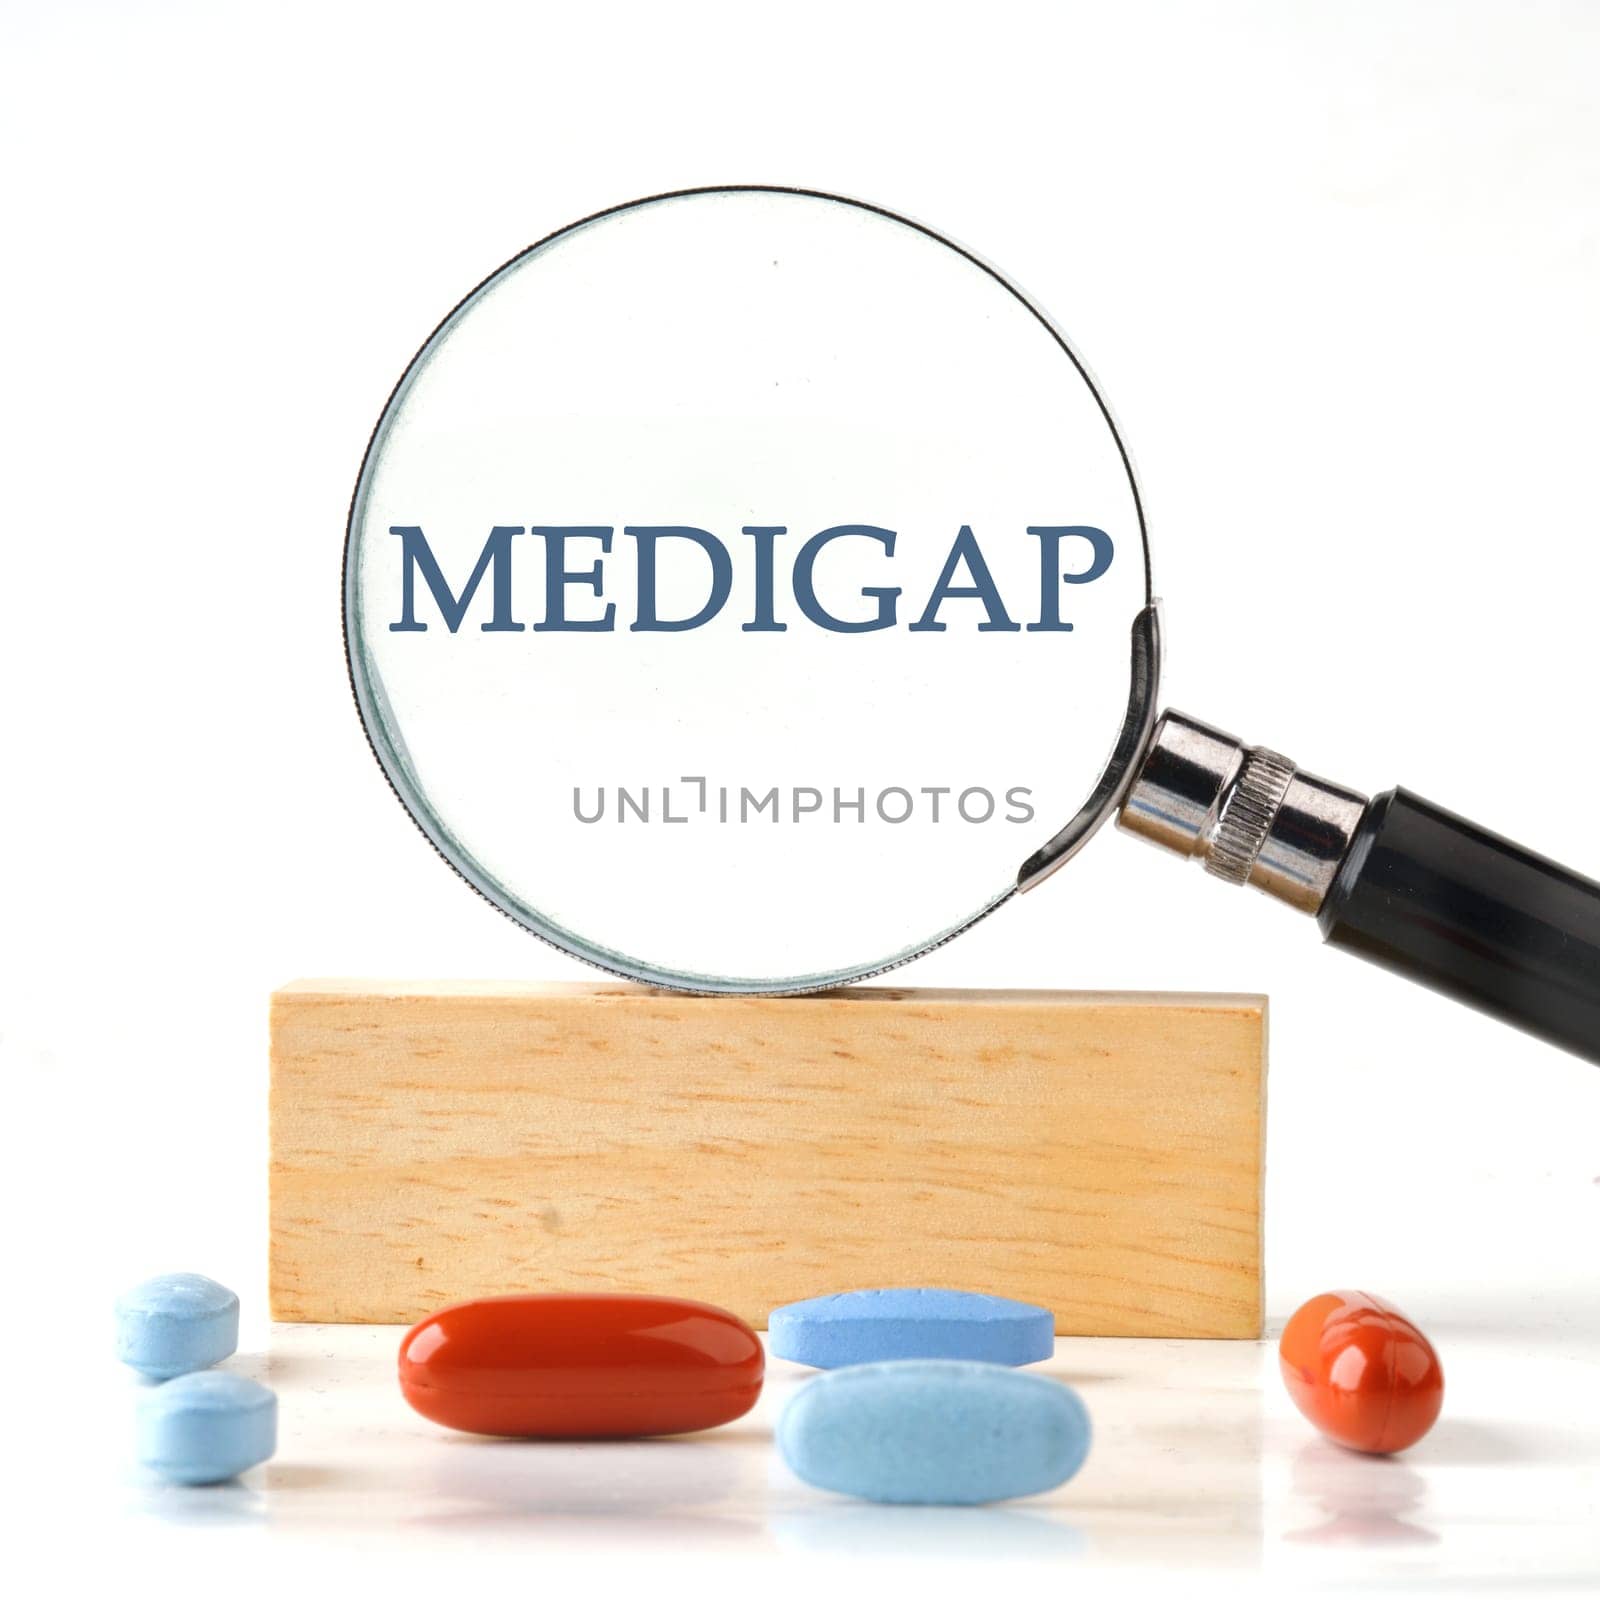 Medical concept. MEDIGAP through a magnifying glass on a wooden block with vitamins, pills in the foreground